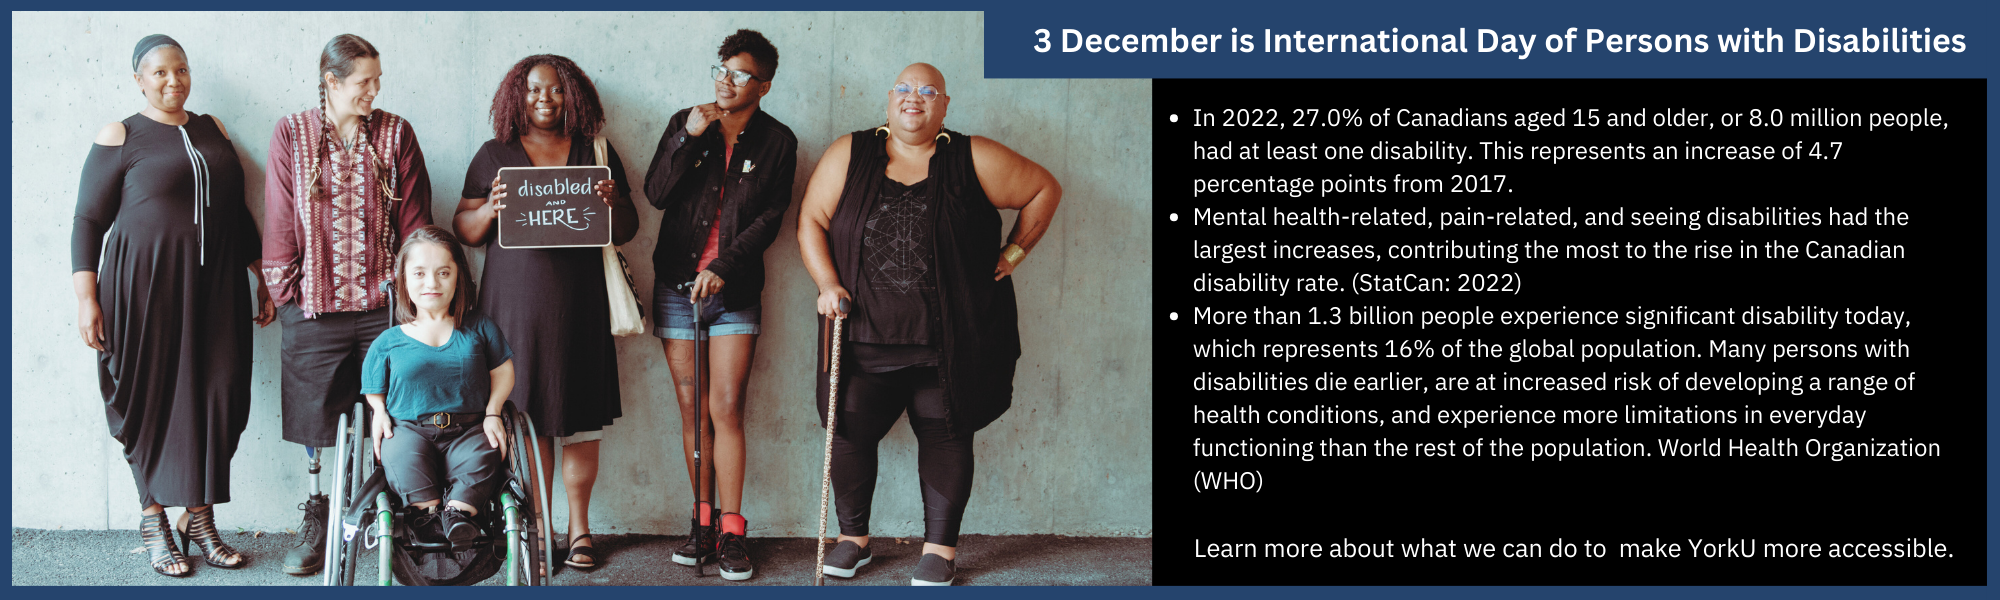 Dec 3 International Day of Persons with Disabilities